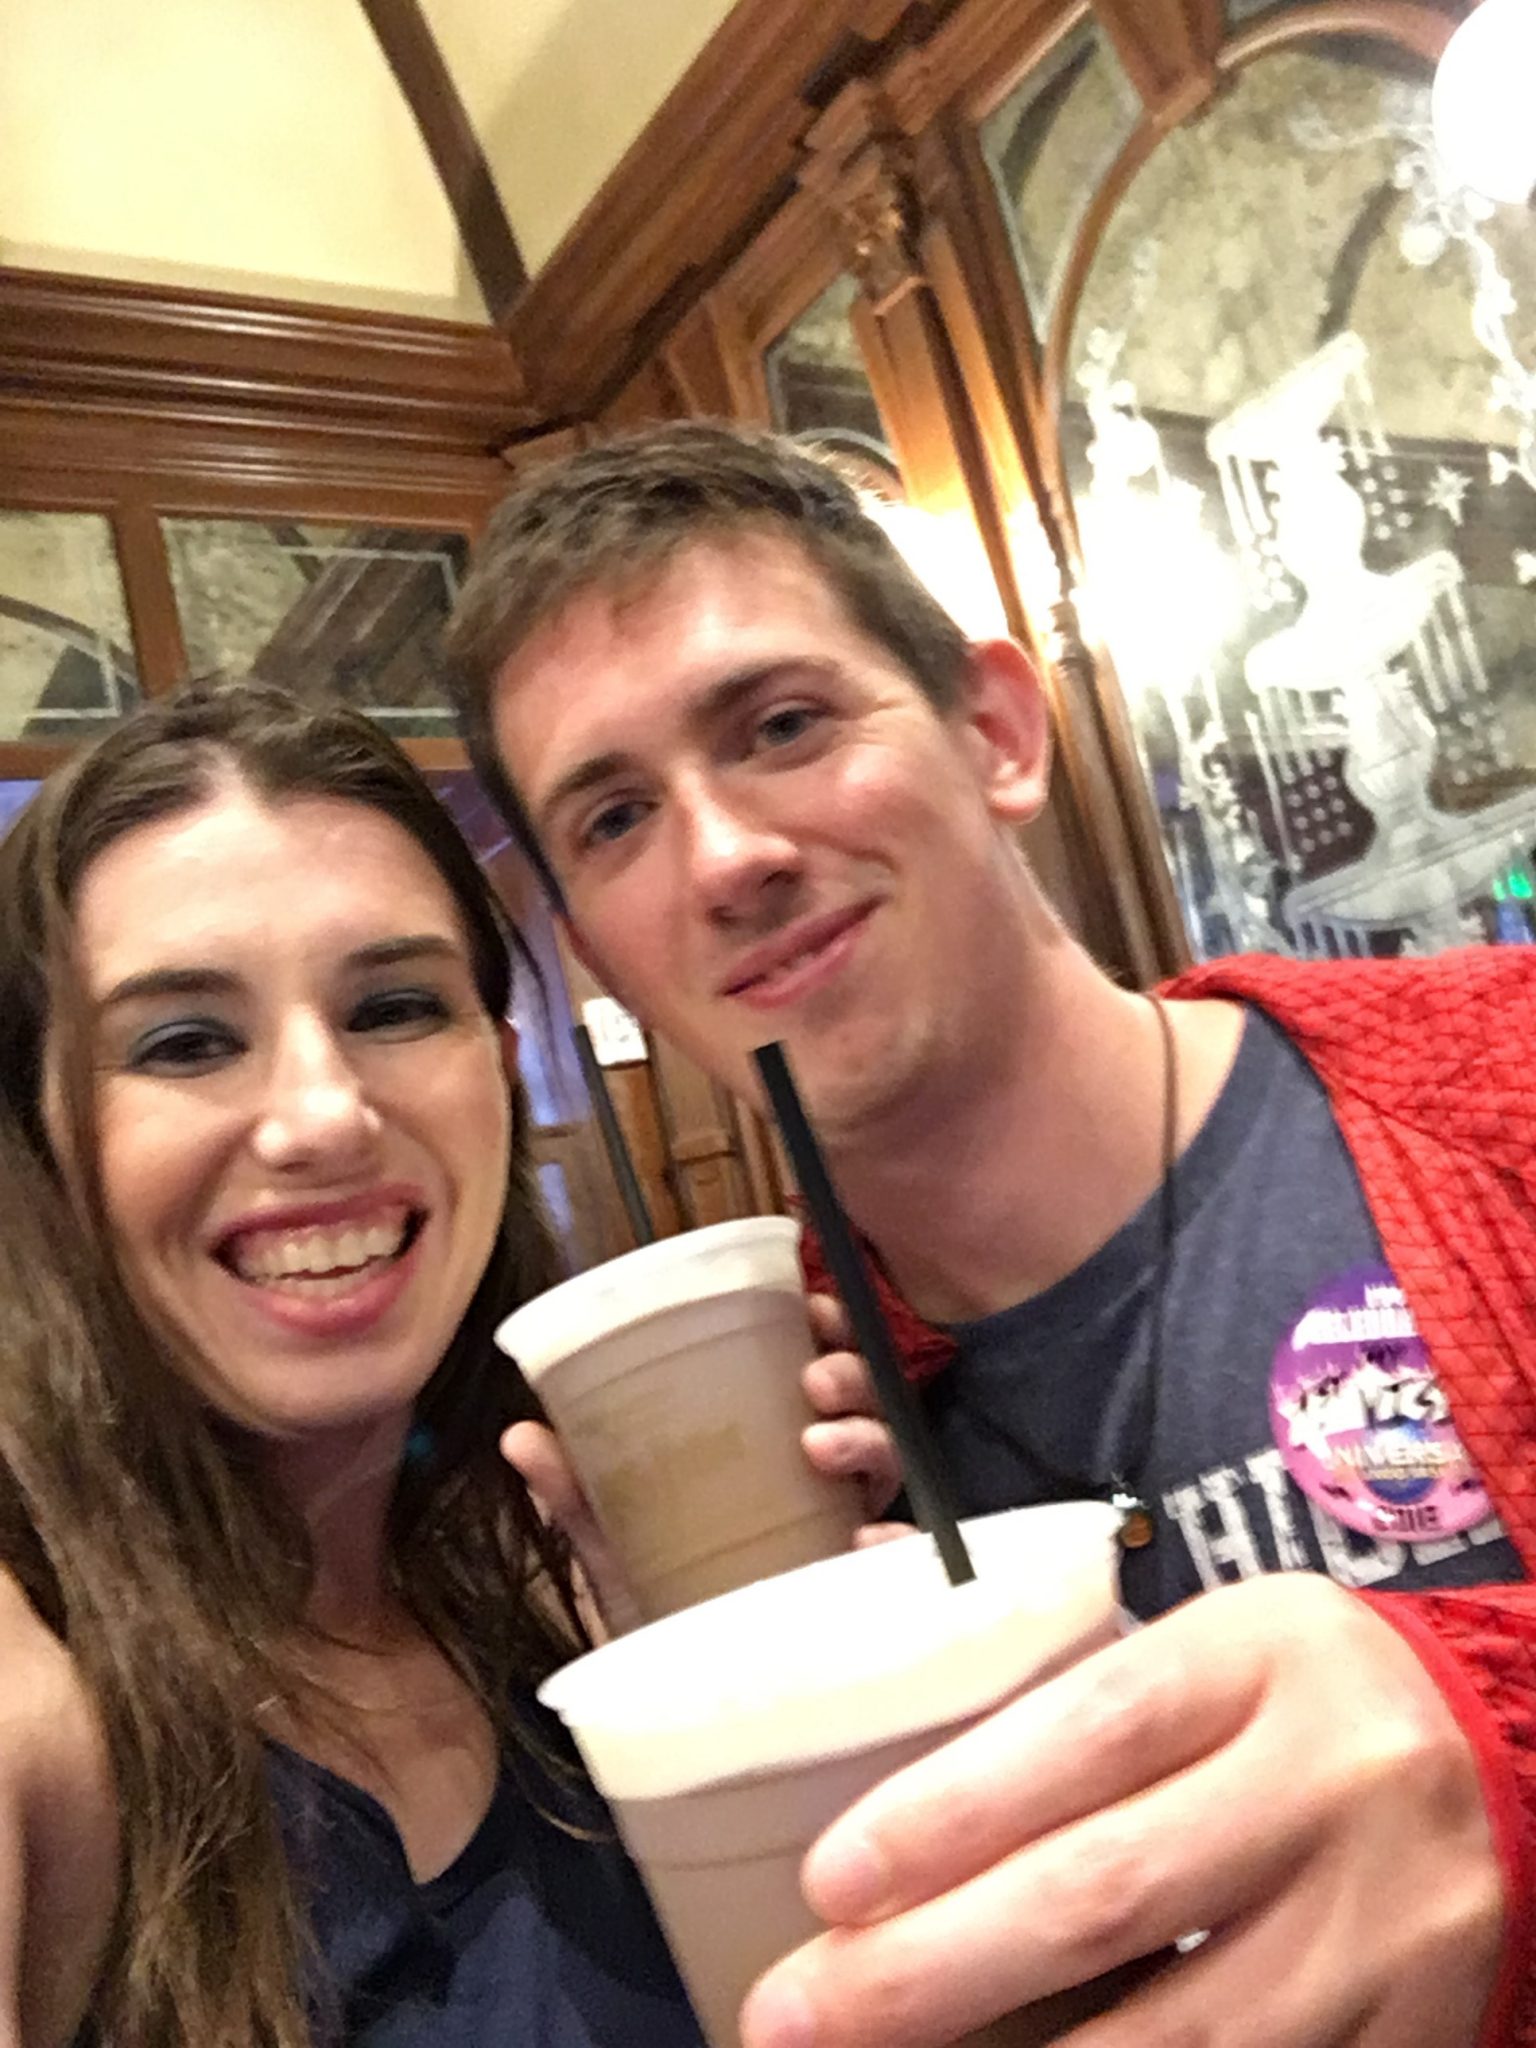 Chelsea and Robby with butterbeers.